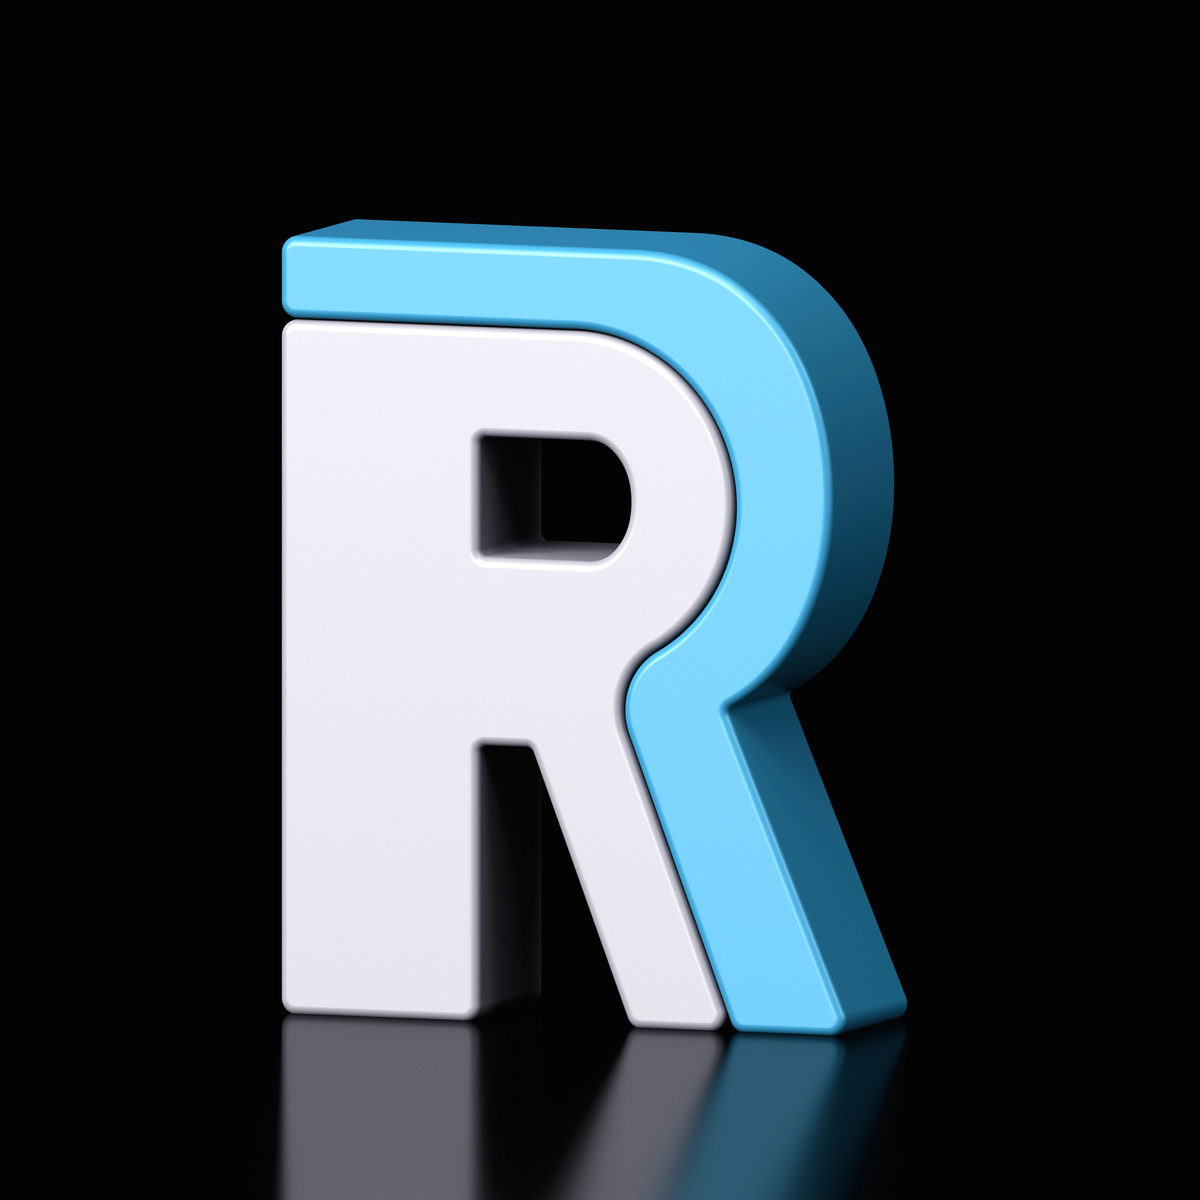 3d letter R plastic light blue and white from alphabet isolated in a black background. Hi tech metallic font character design illustration, text minimal style, 3d rendering